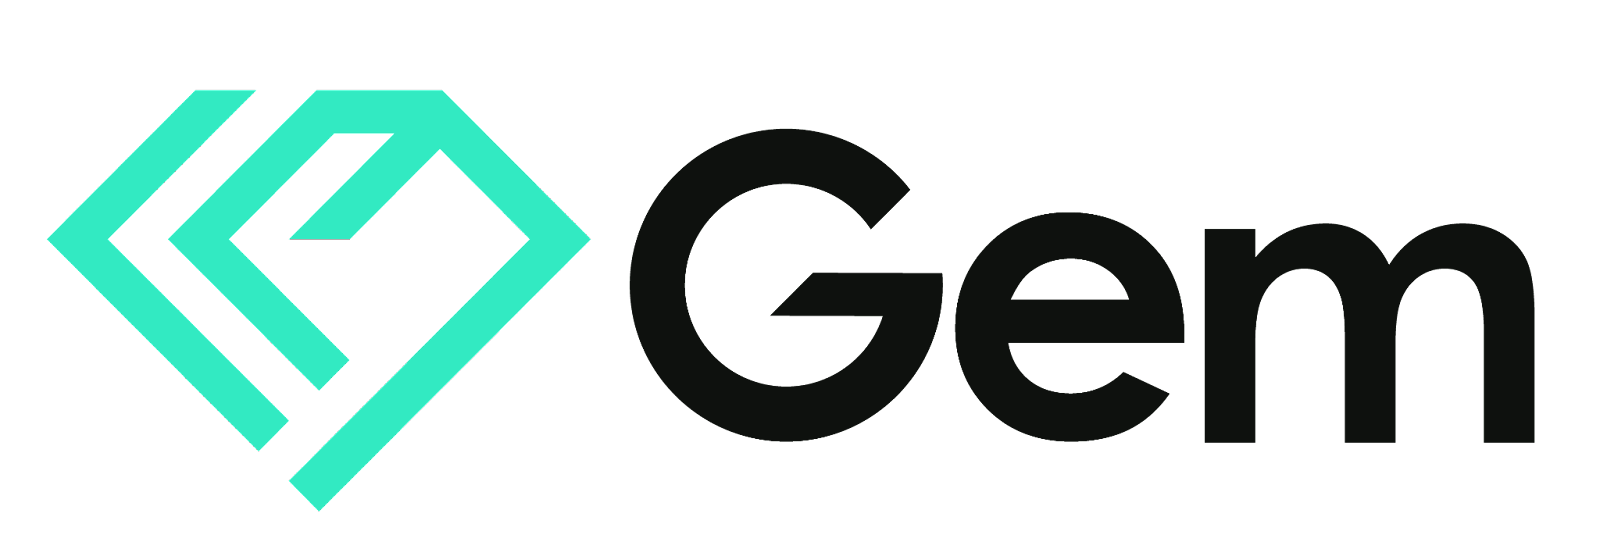 Gem_horizontal_green_logo_with_black_letters.png